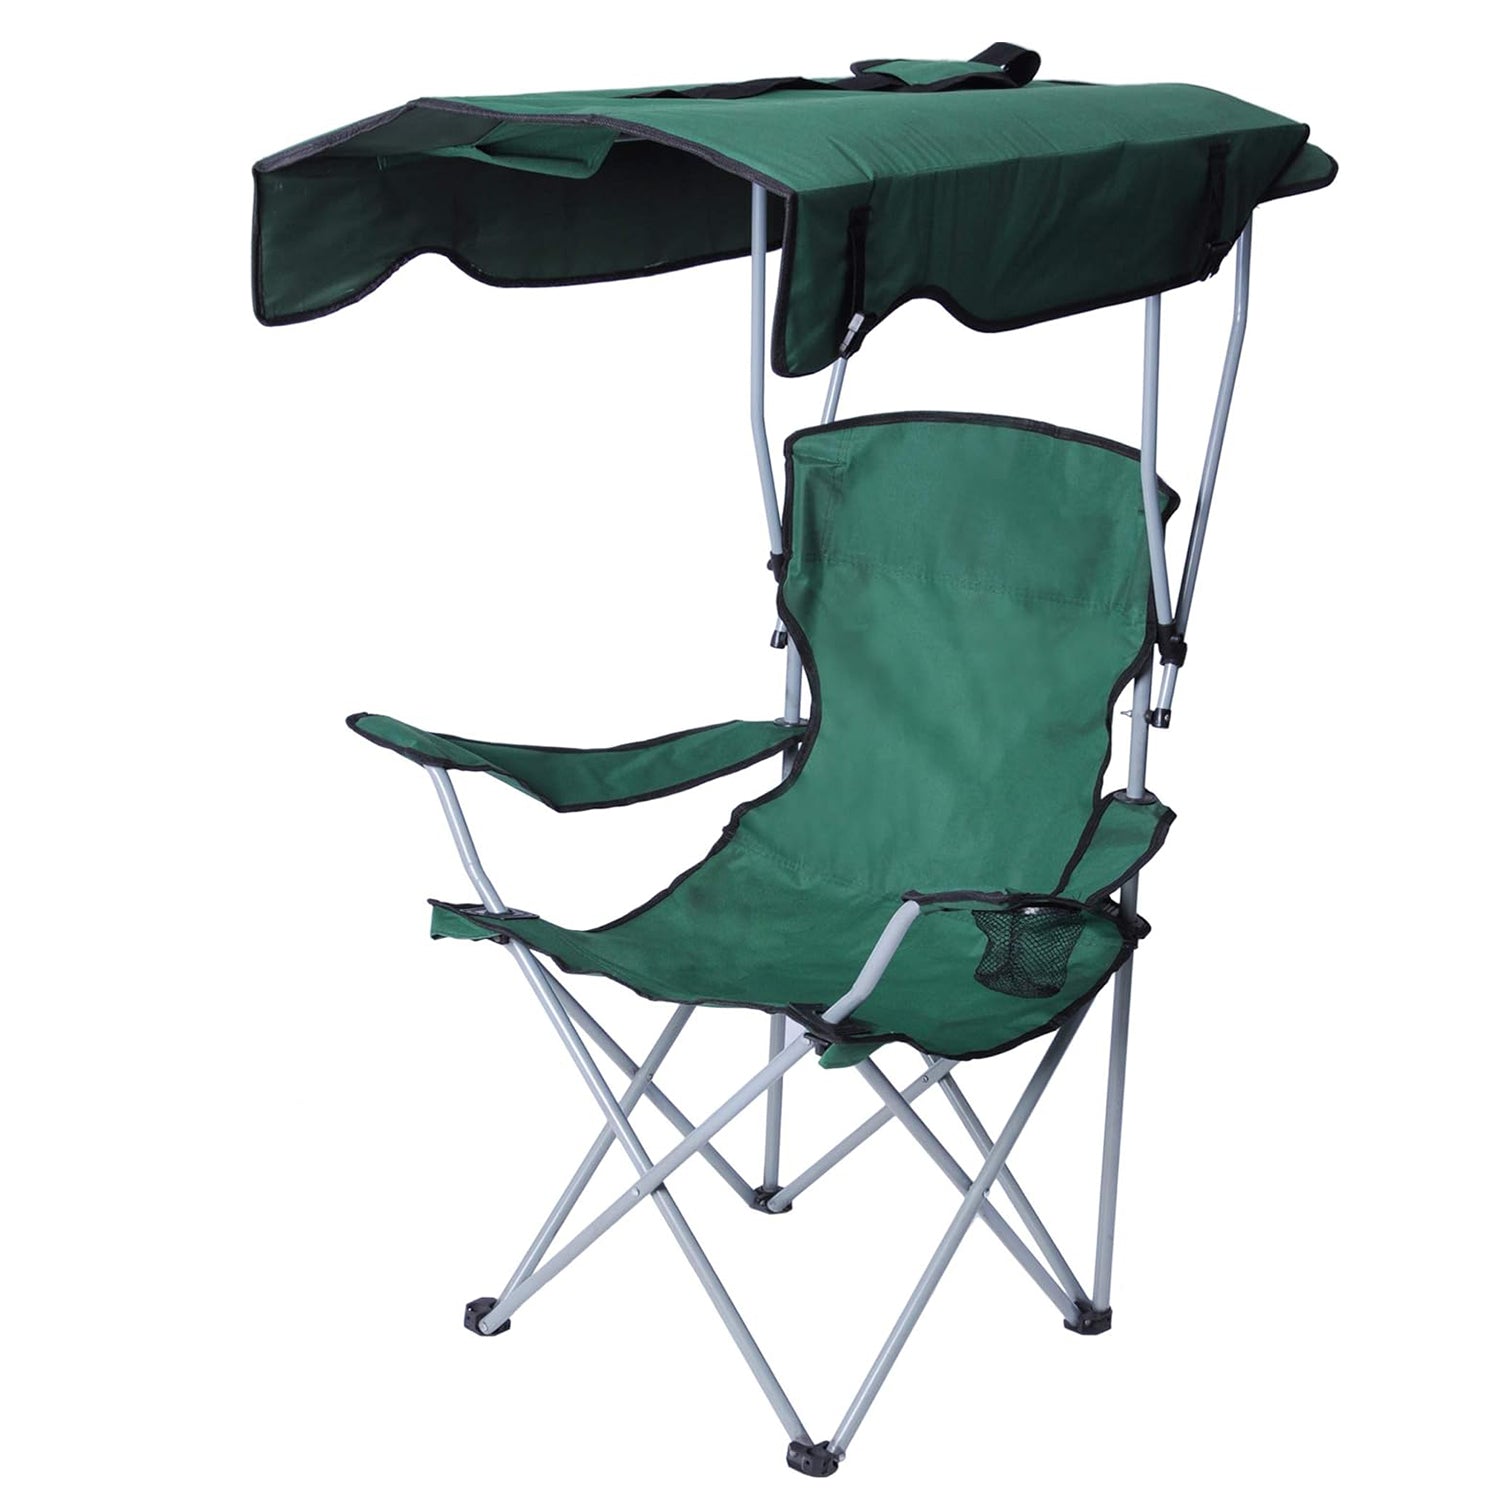 Portable Camping Chairs with Shade Canopy Cup Holder Carry Bag Folding Beach Chairs, Green